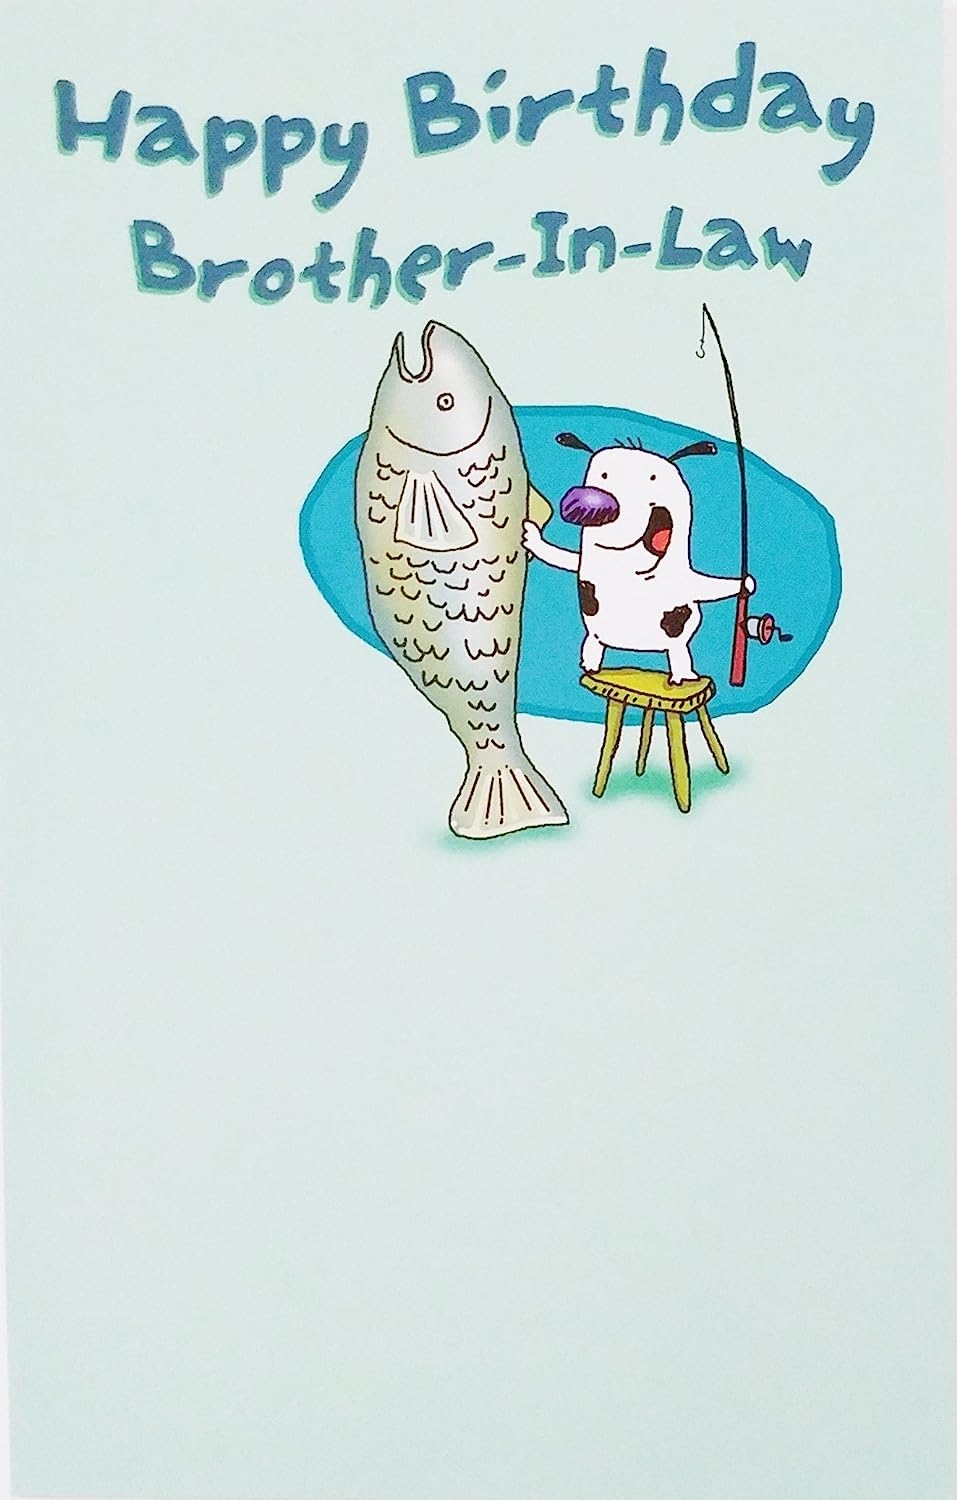 Happy Birthday Brother-in-Law Greeting Card -“May all your fishes come true!” – Funny/Dog Fishing   price checker   price